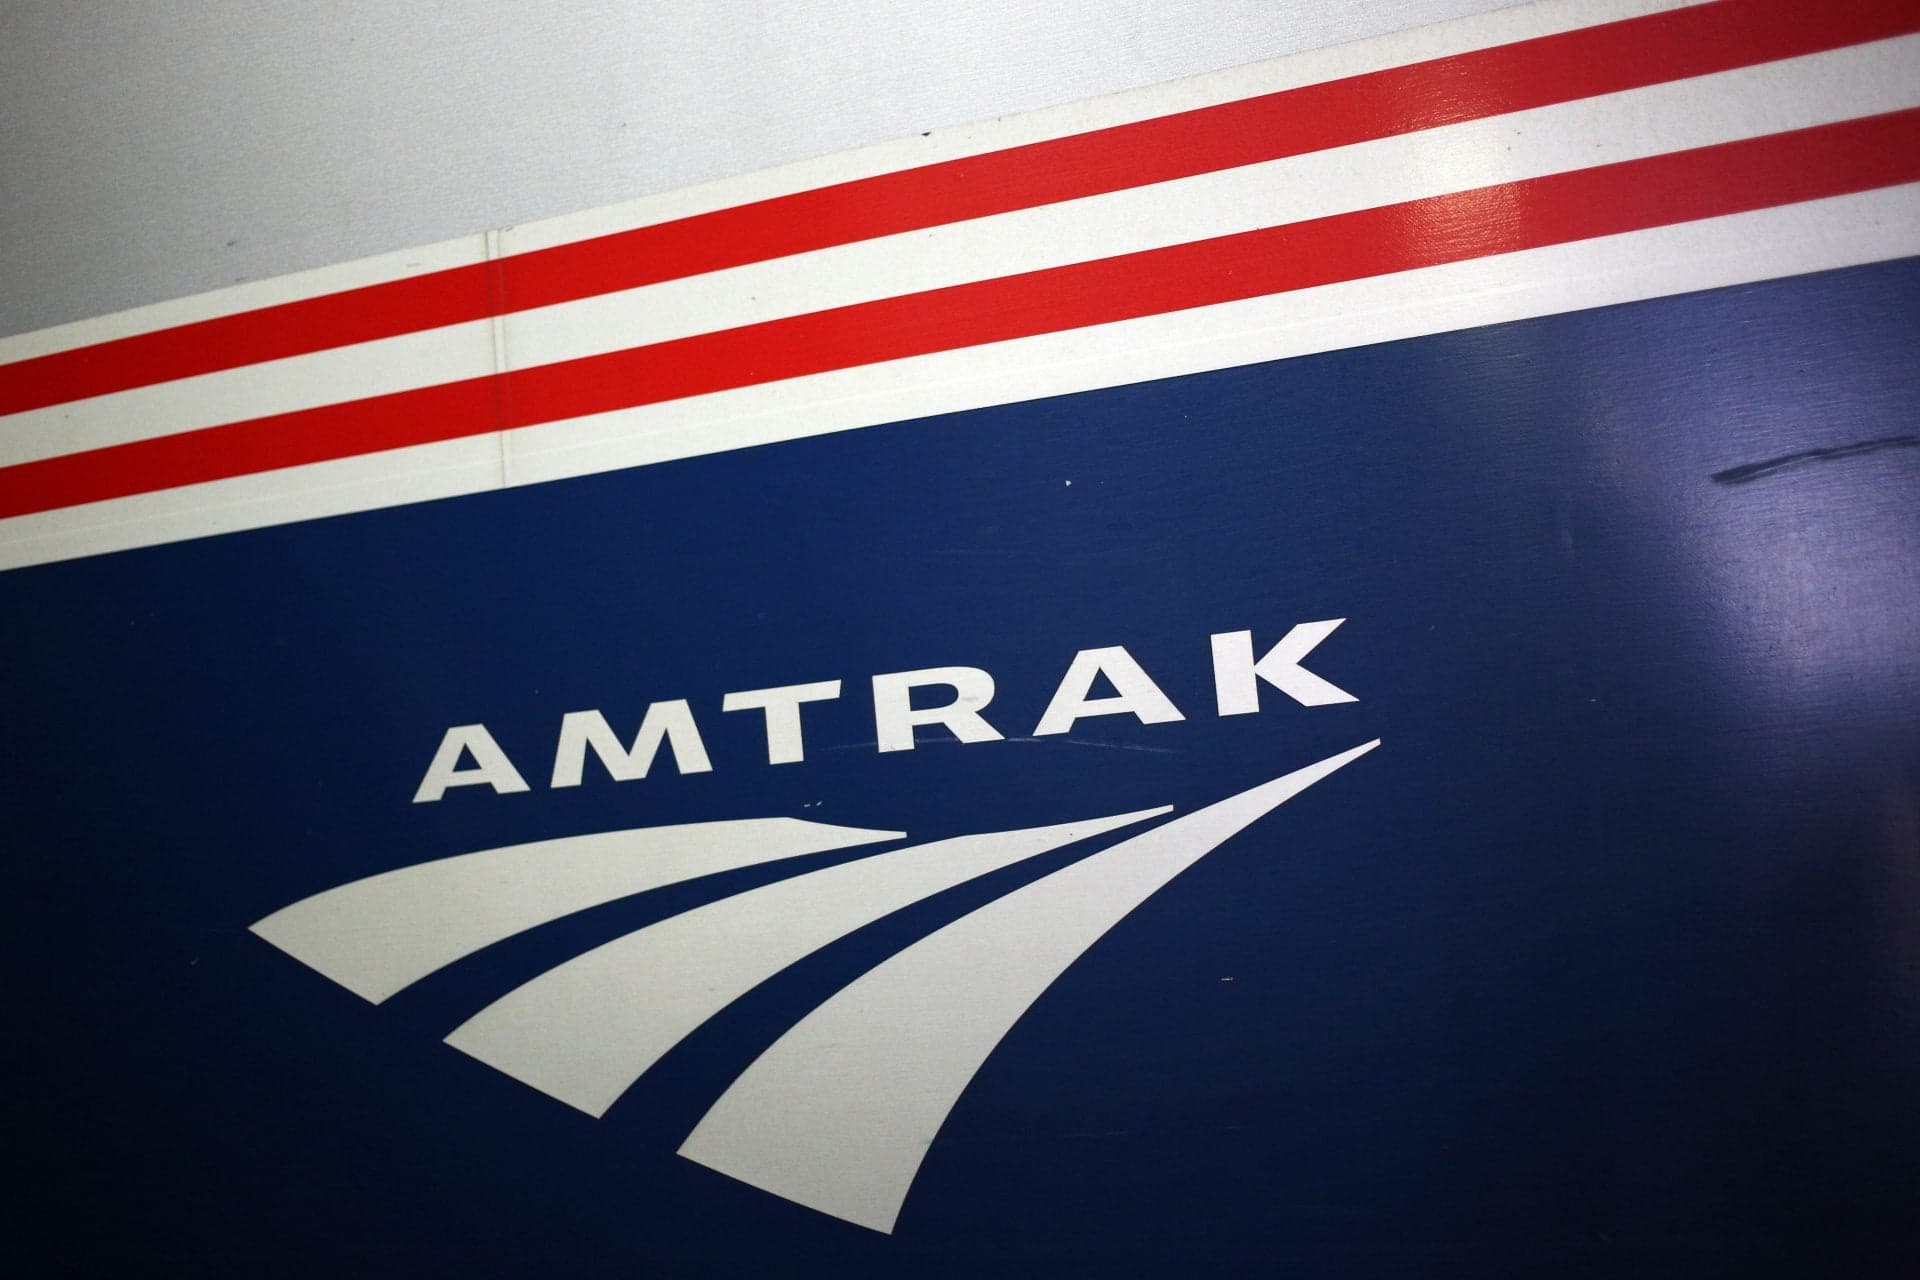 No One Hurt as Amtrak Train Carrying More than 300 Derails in Snowy Georgia